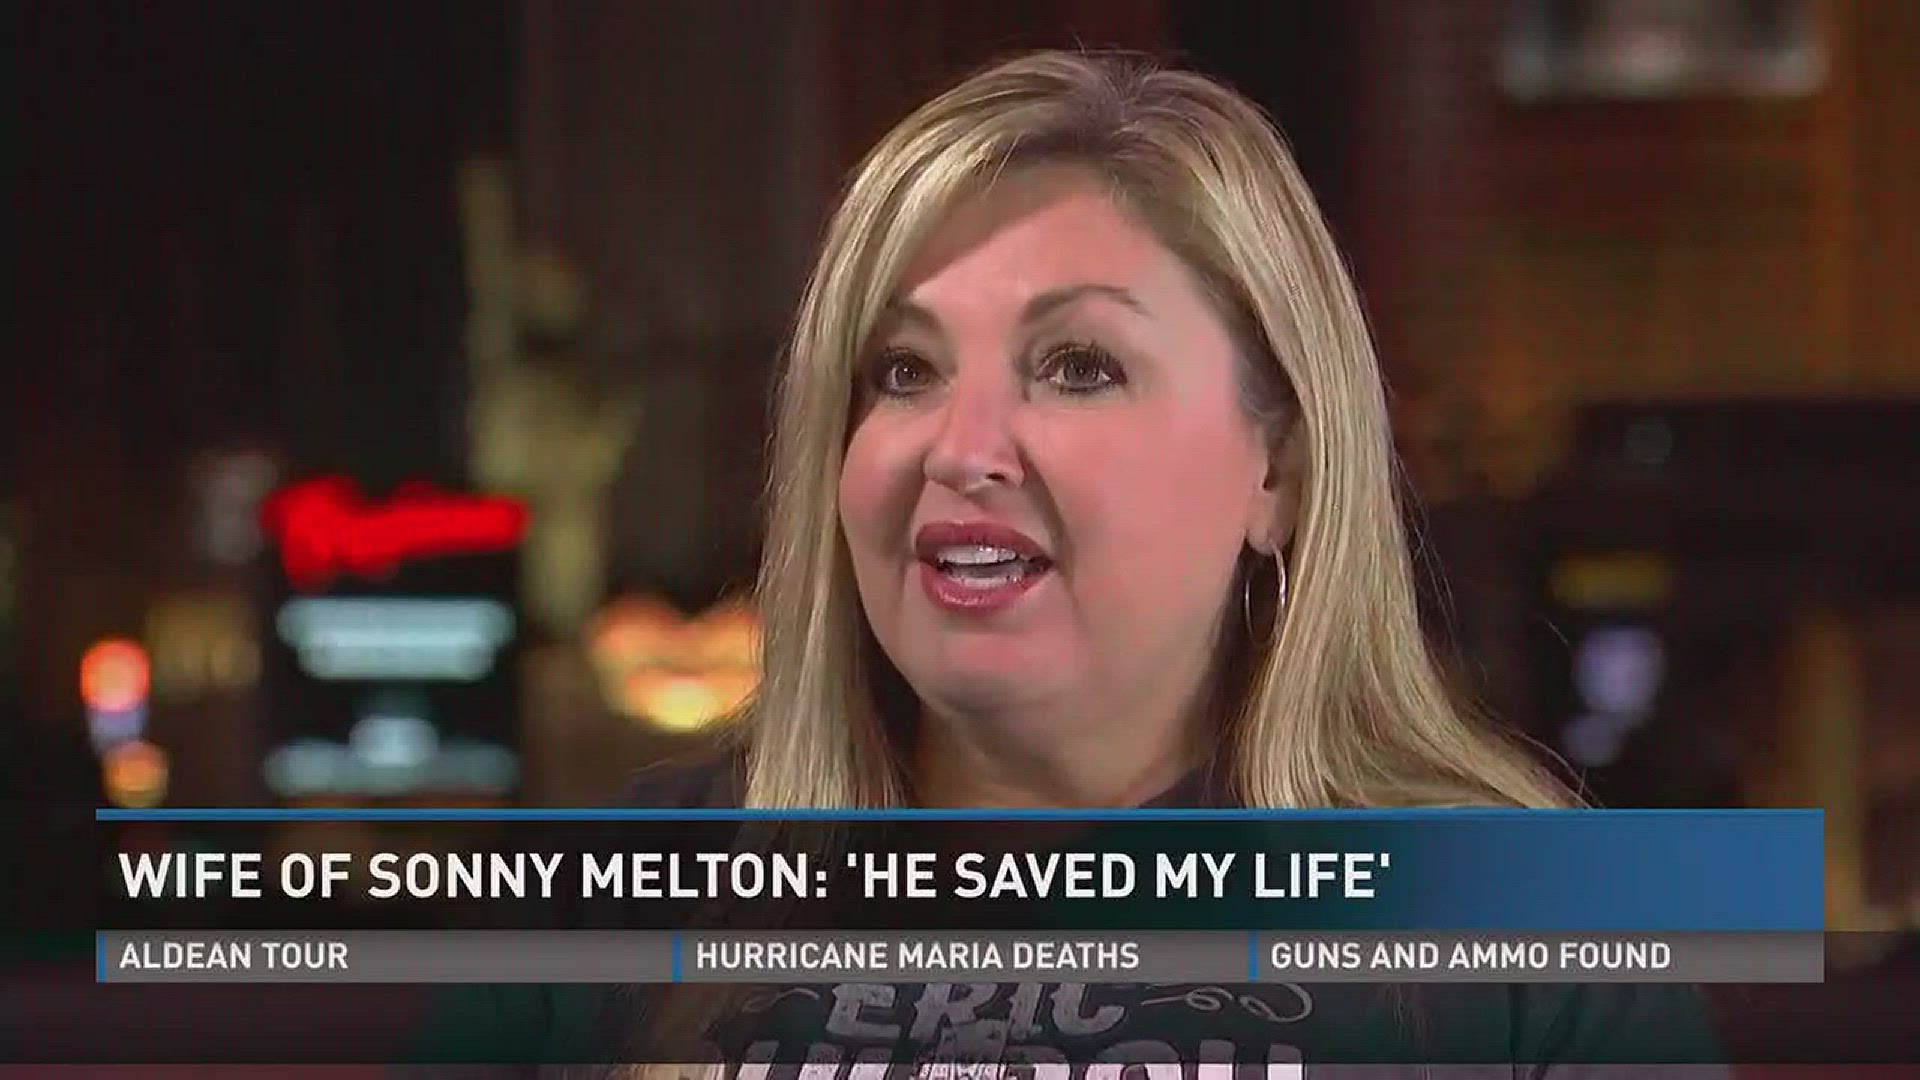 The wife says Sonny gave his life shielded her from gunfire during the Las Vegas shootings.